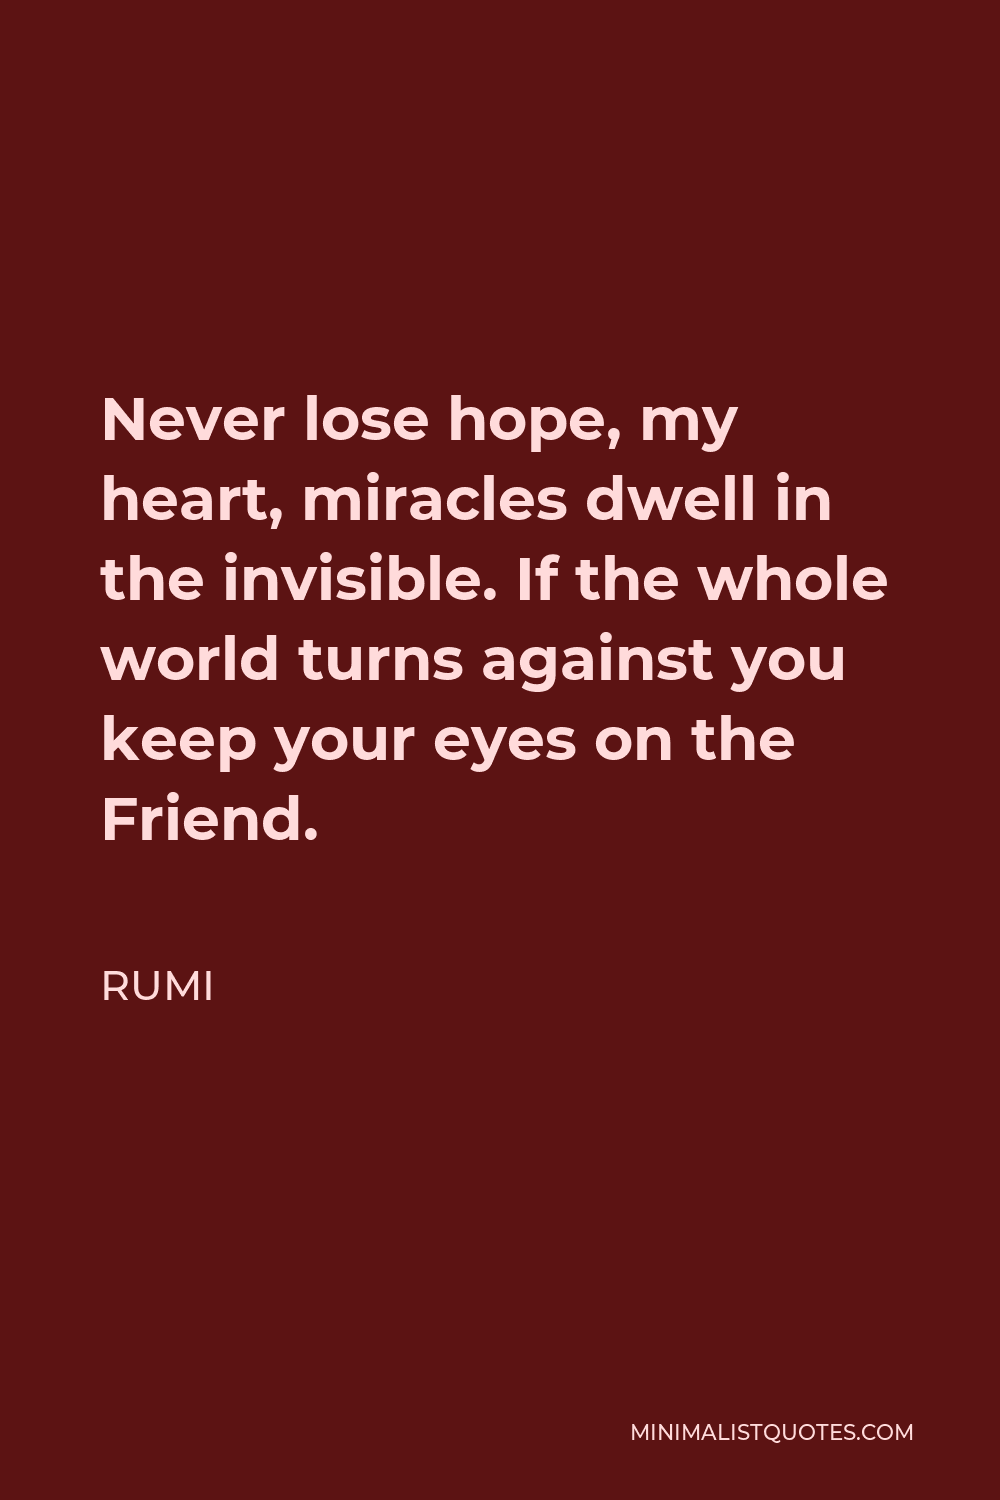 Rumi Quote - Never lose hope, my heart, miracles dwell in the invisible. If the whole world turns against you keep your eyes on the Friend.